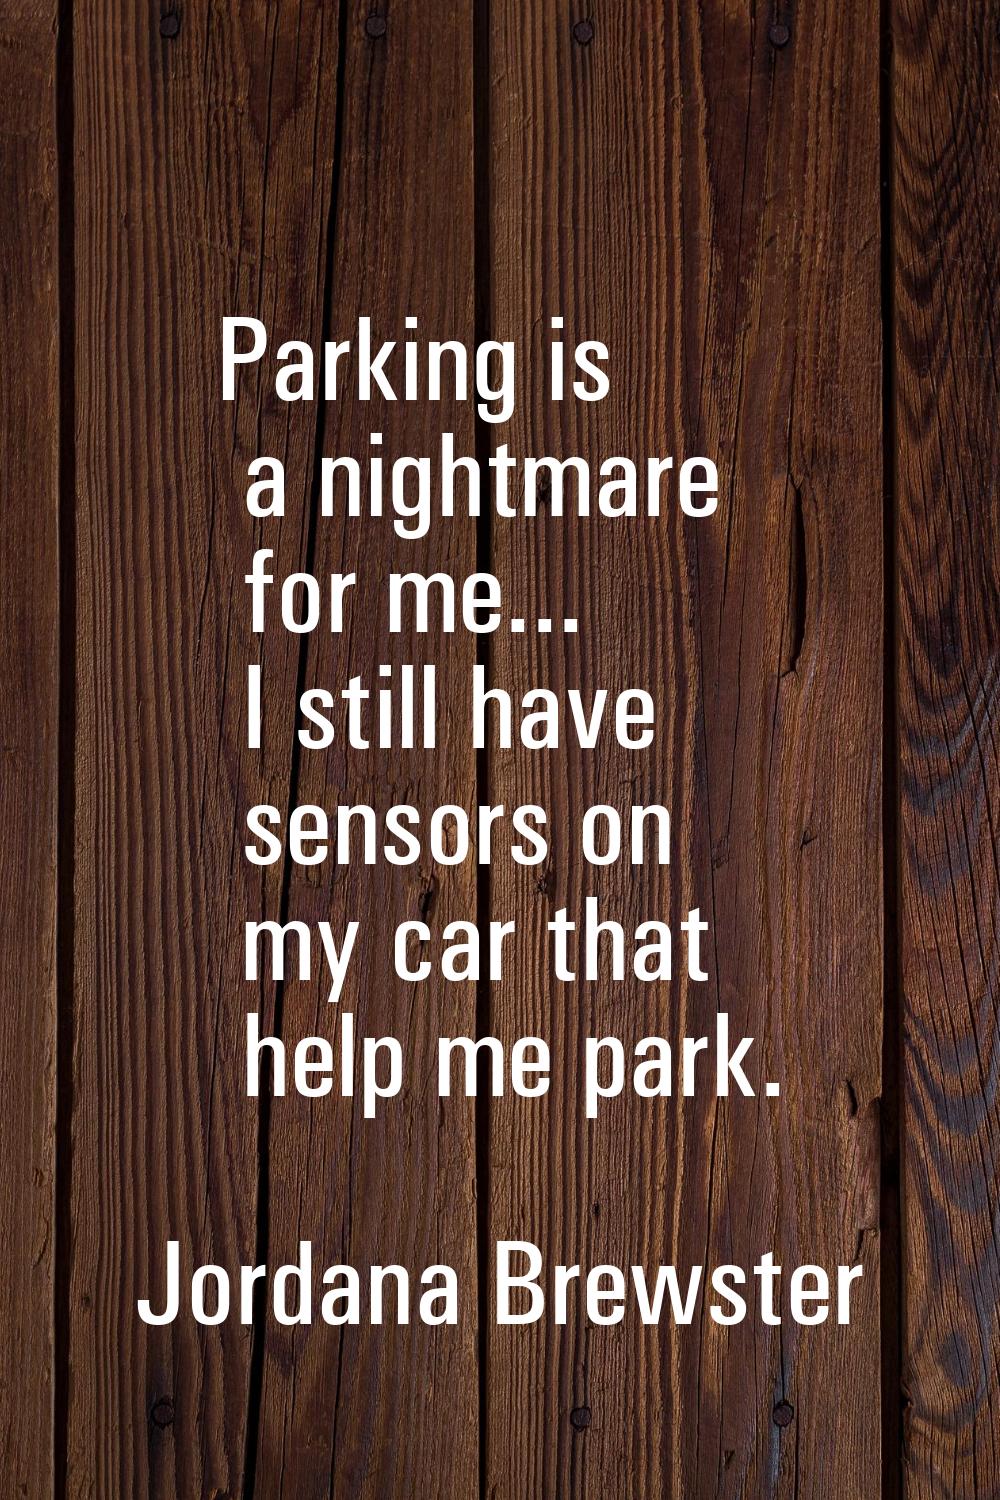 Parking is a nightmare for me... I still have sensors on my car that help me park.